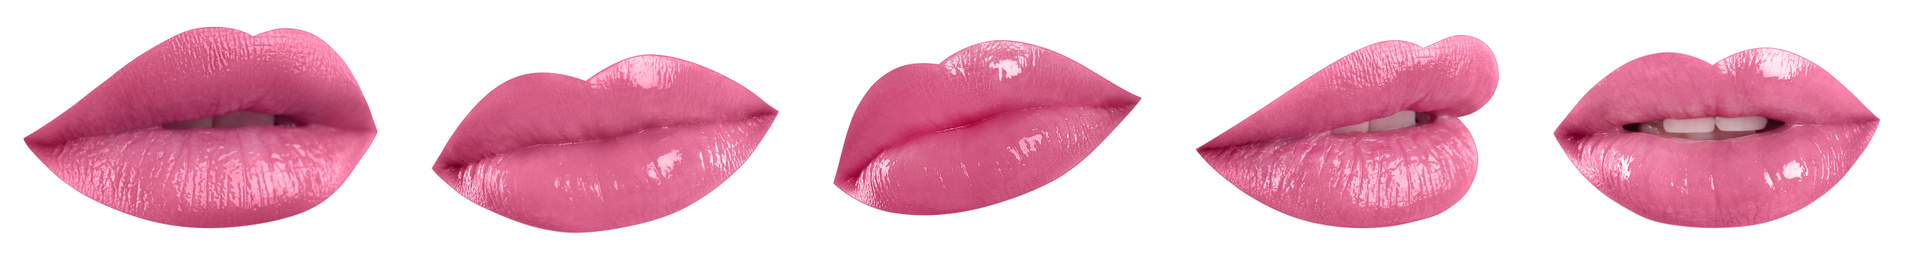 Set of mouths with beautiful makeup on white background, banner design. Glossy pink lipstick